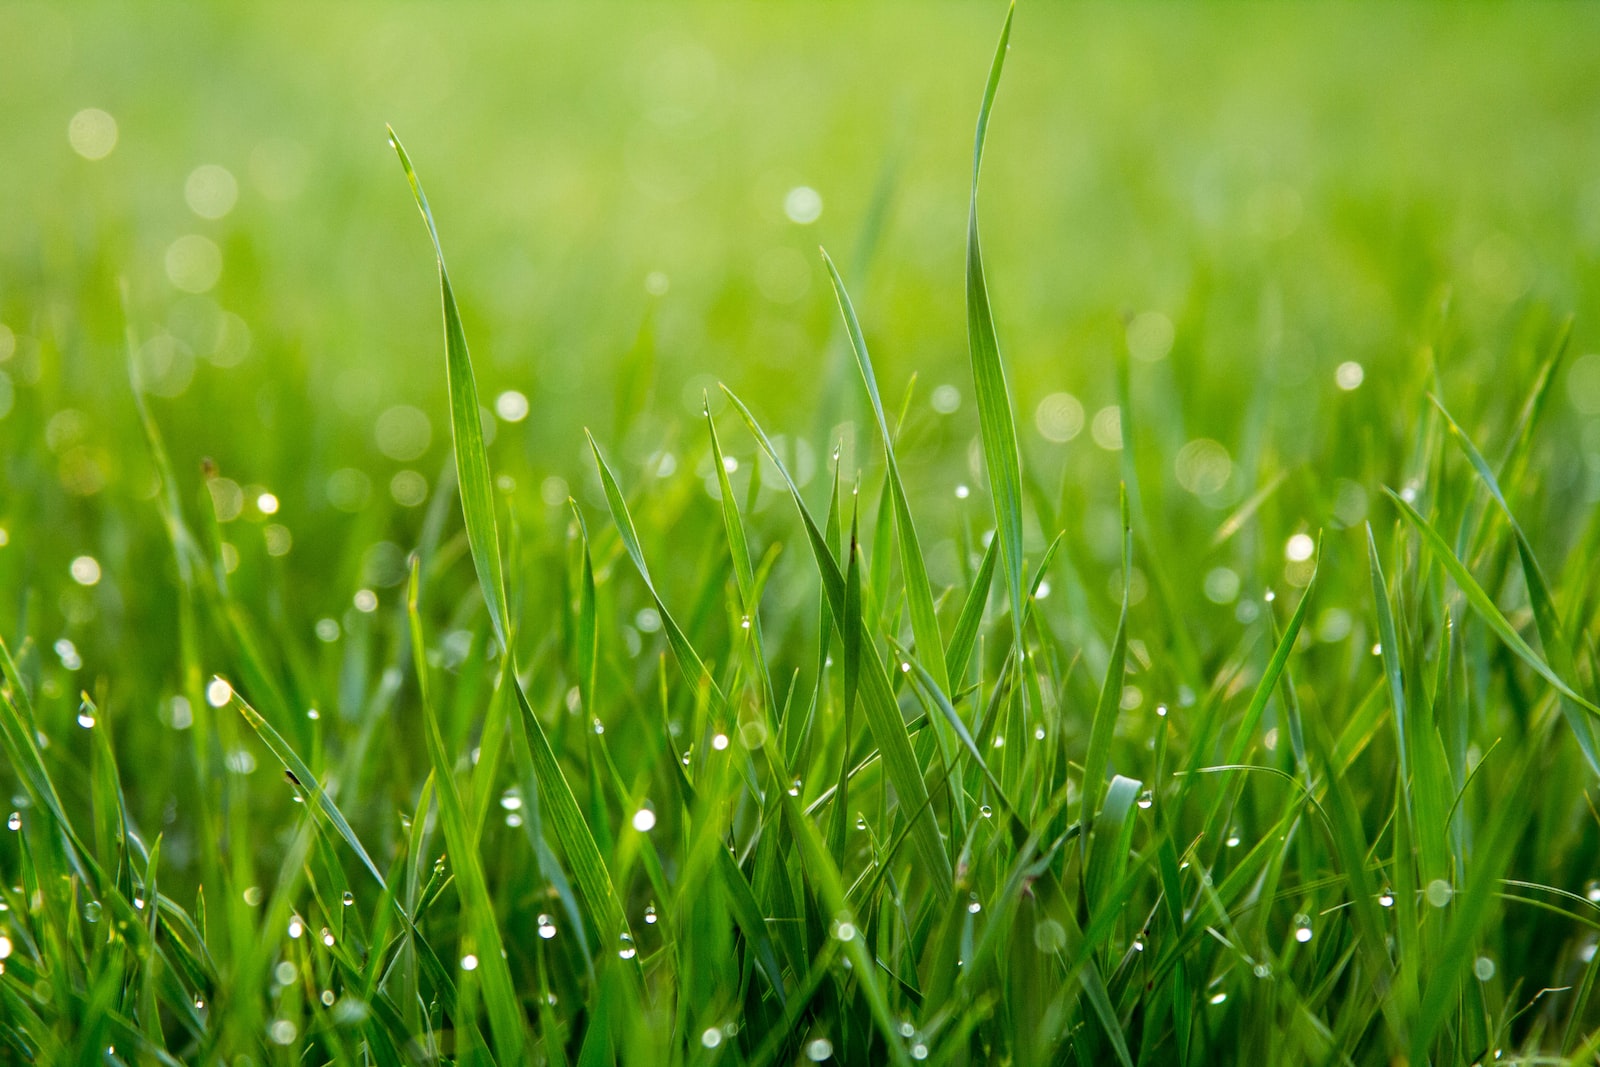 How Long Does It Take for Grass to Dry? Essential Factors and Tips to Know